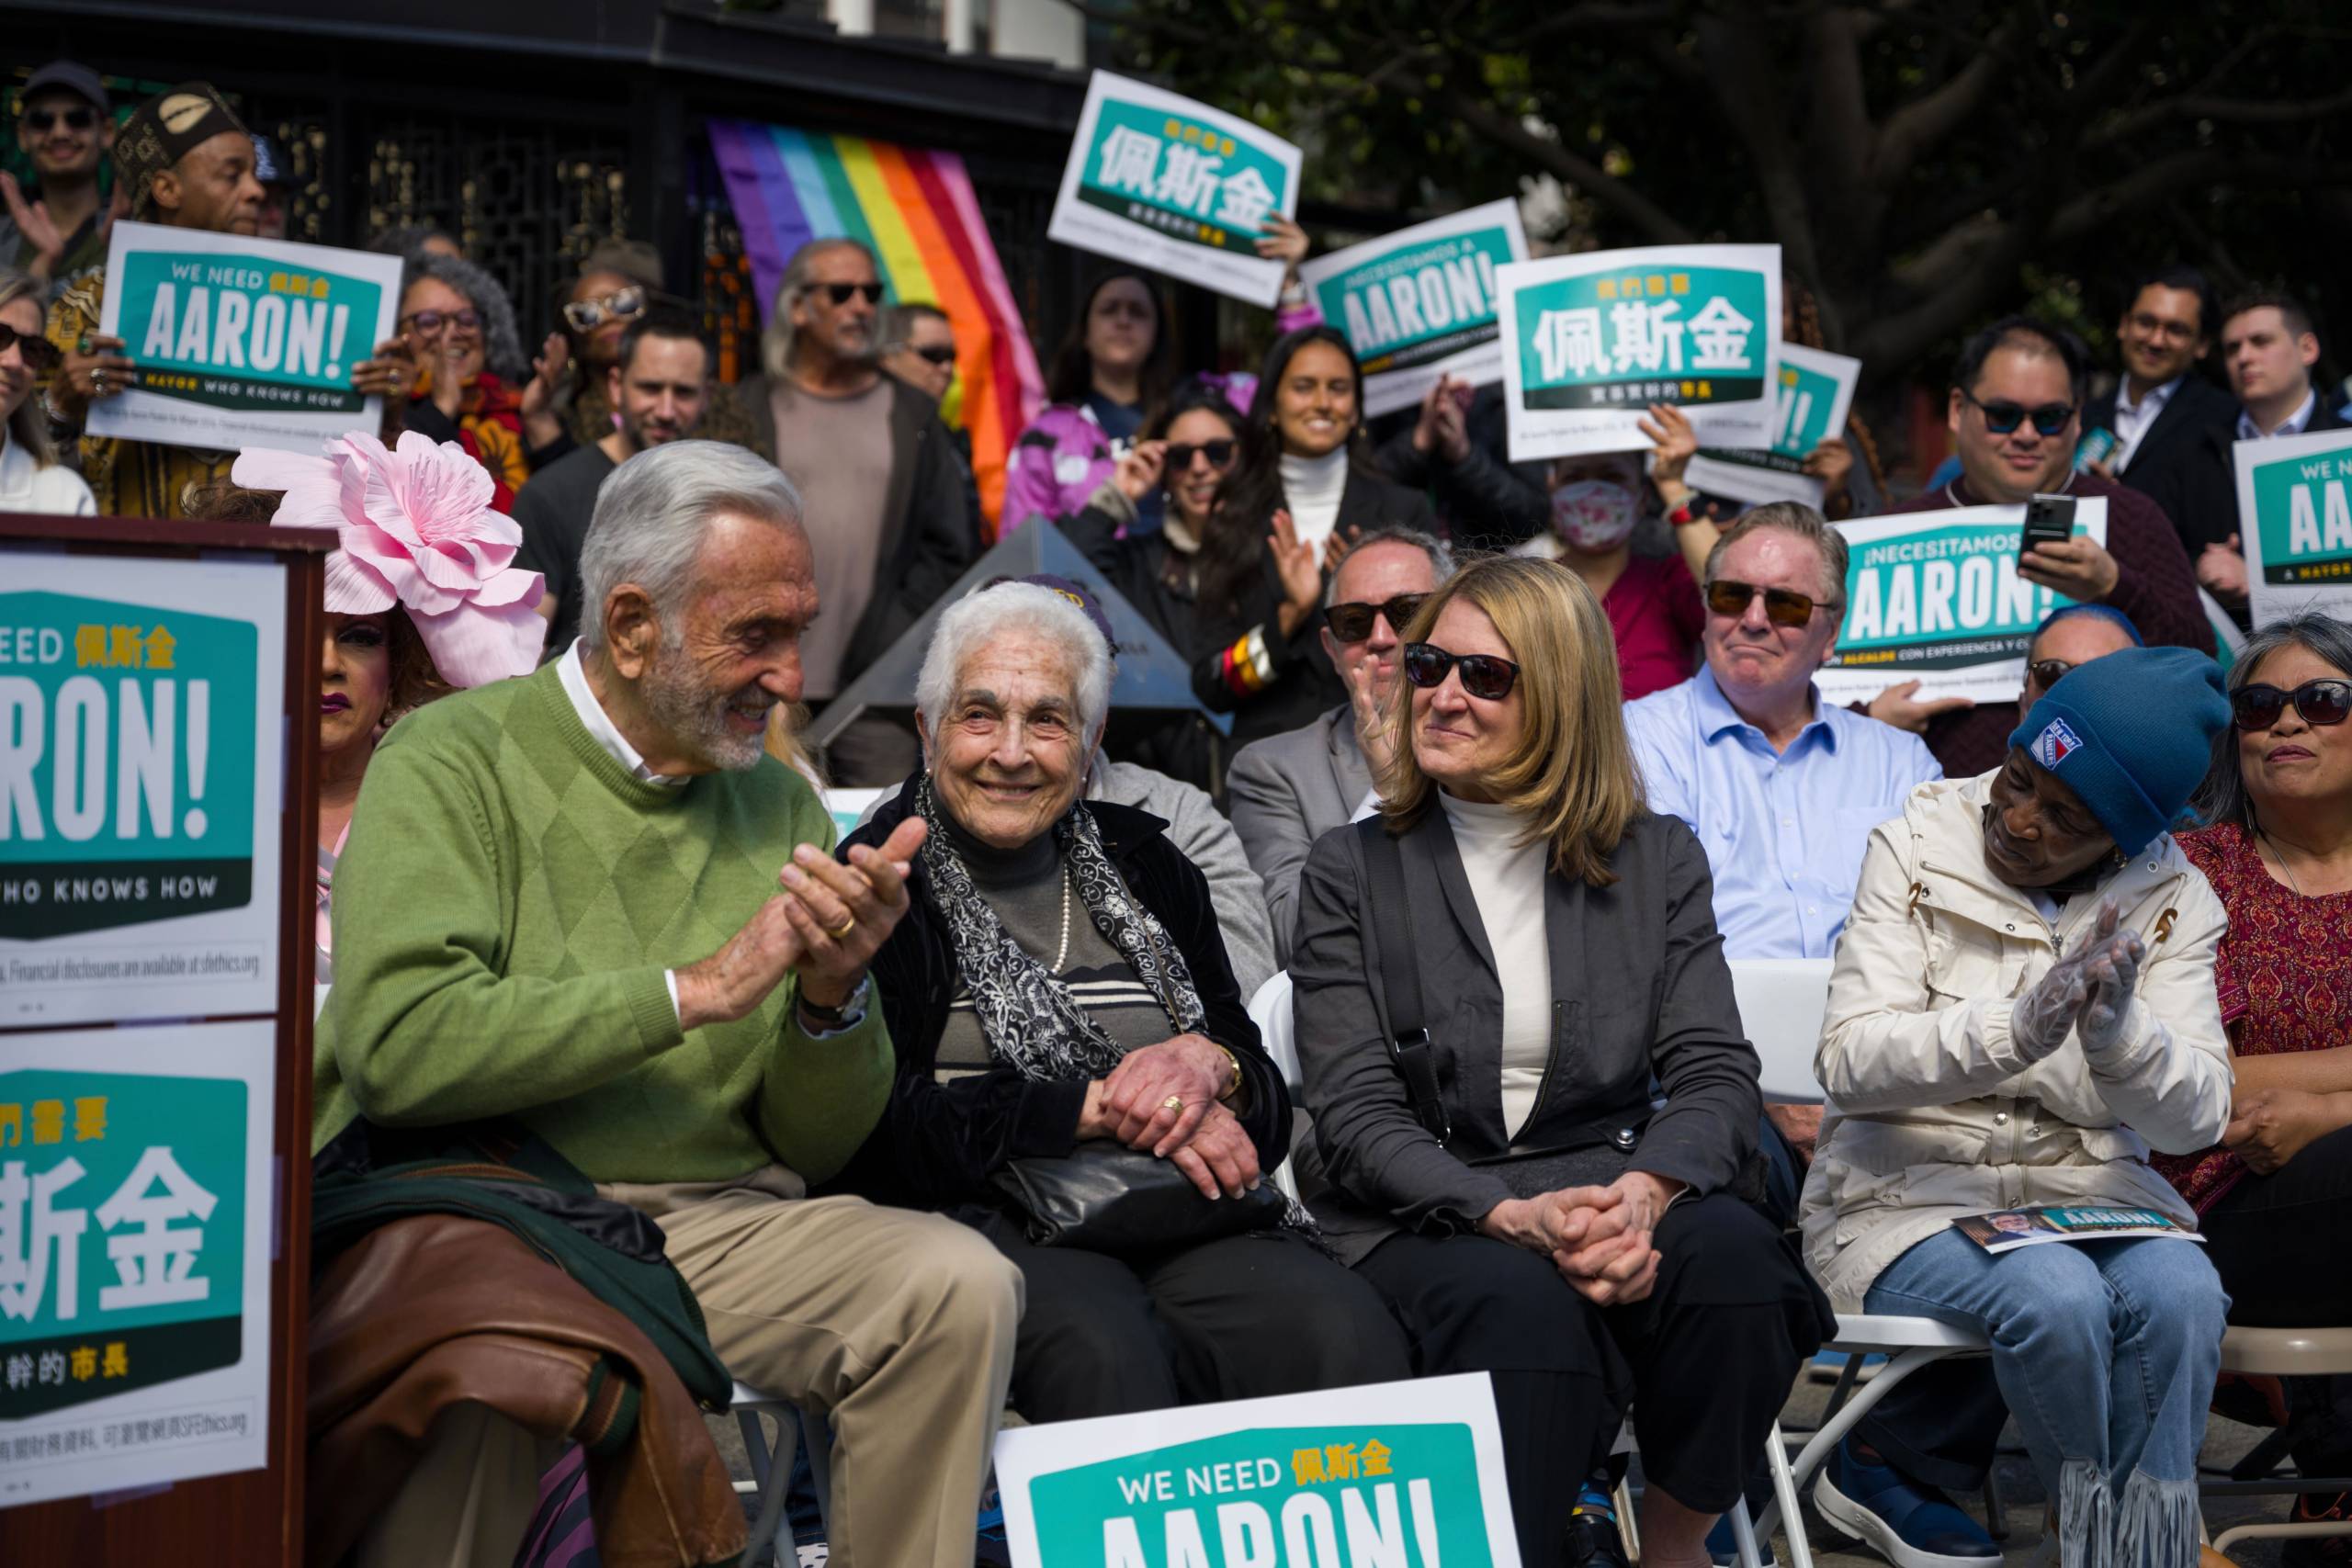 An older lady sits with people on either side and supporters of Aaron Peskin behind her waving signs.